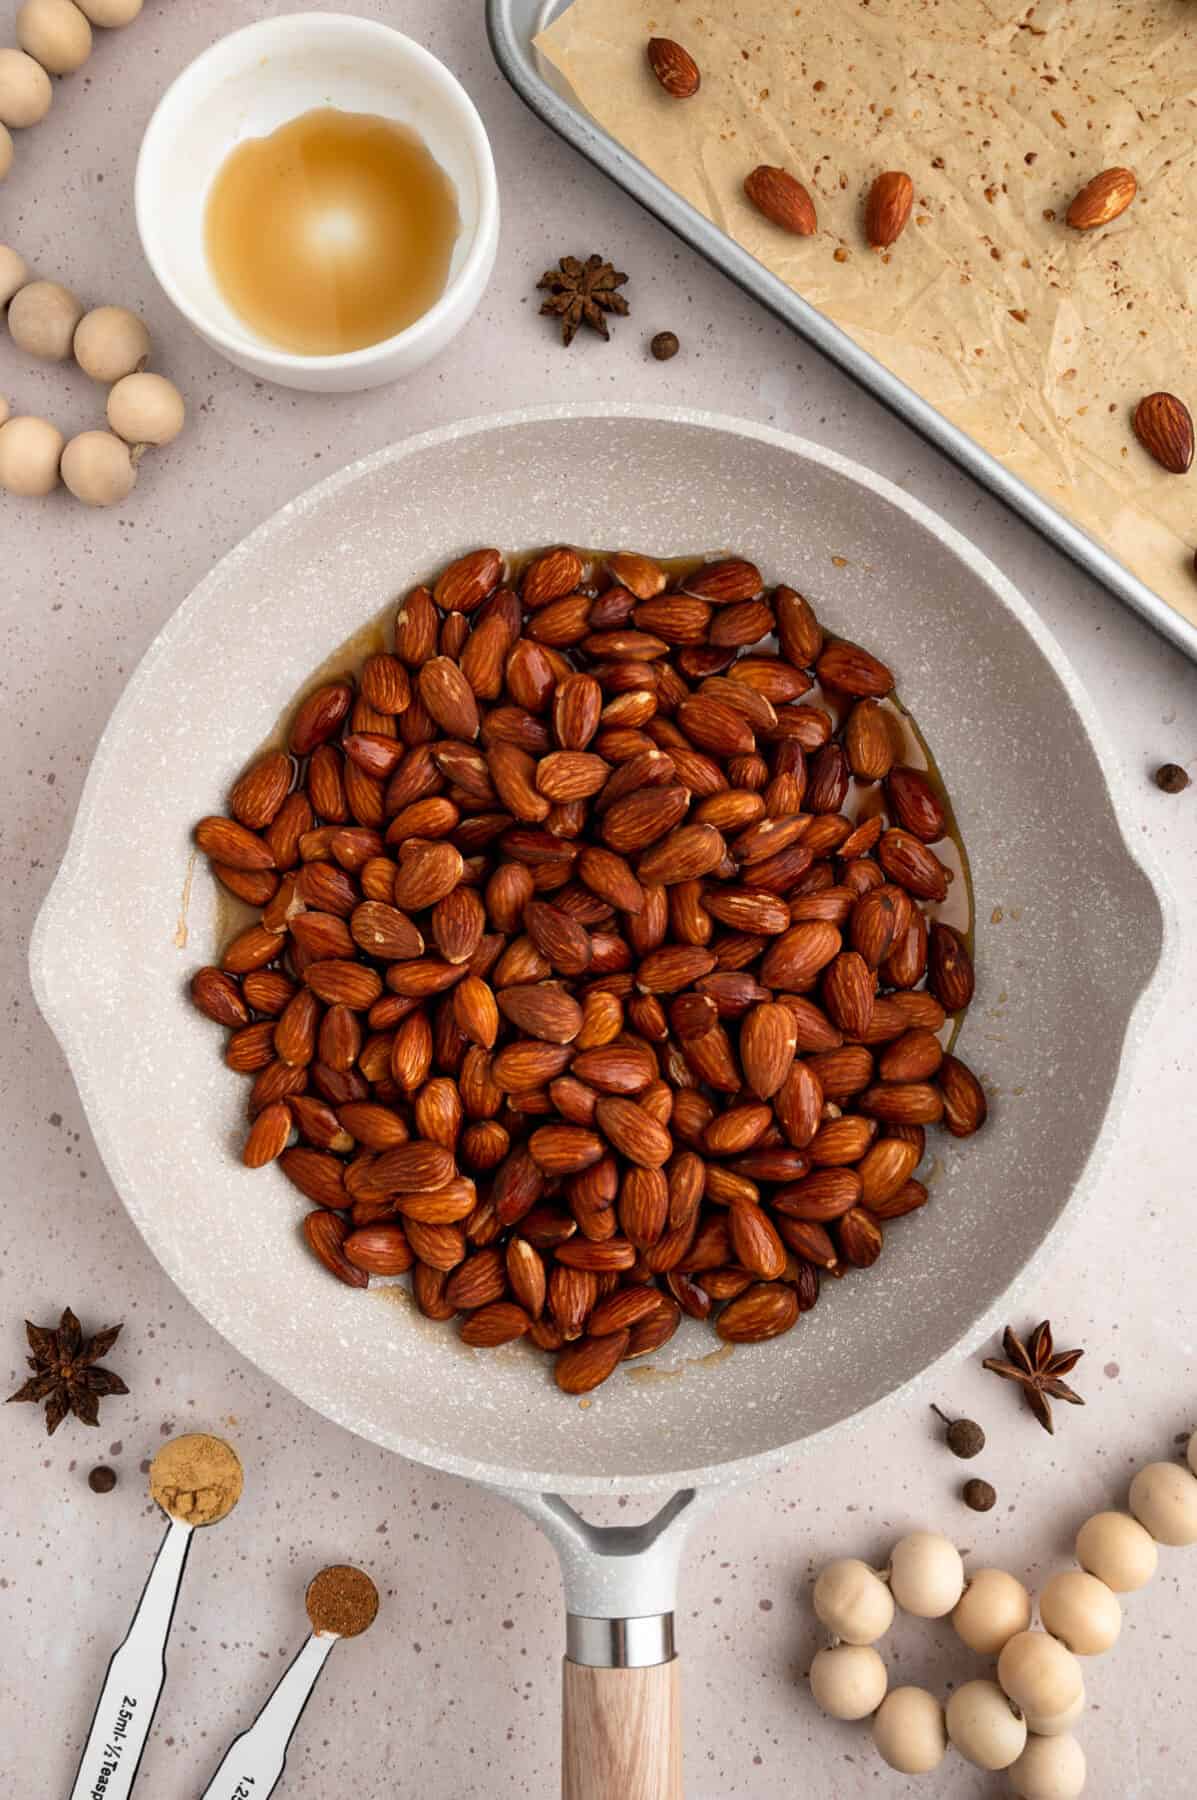 roasted almonds added to the skillet with the maple syrup.